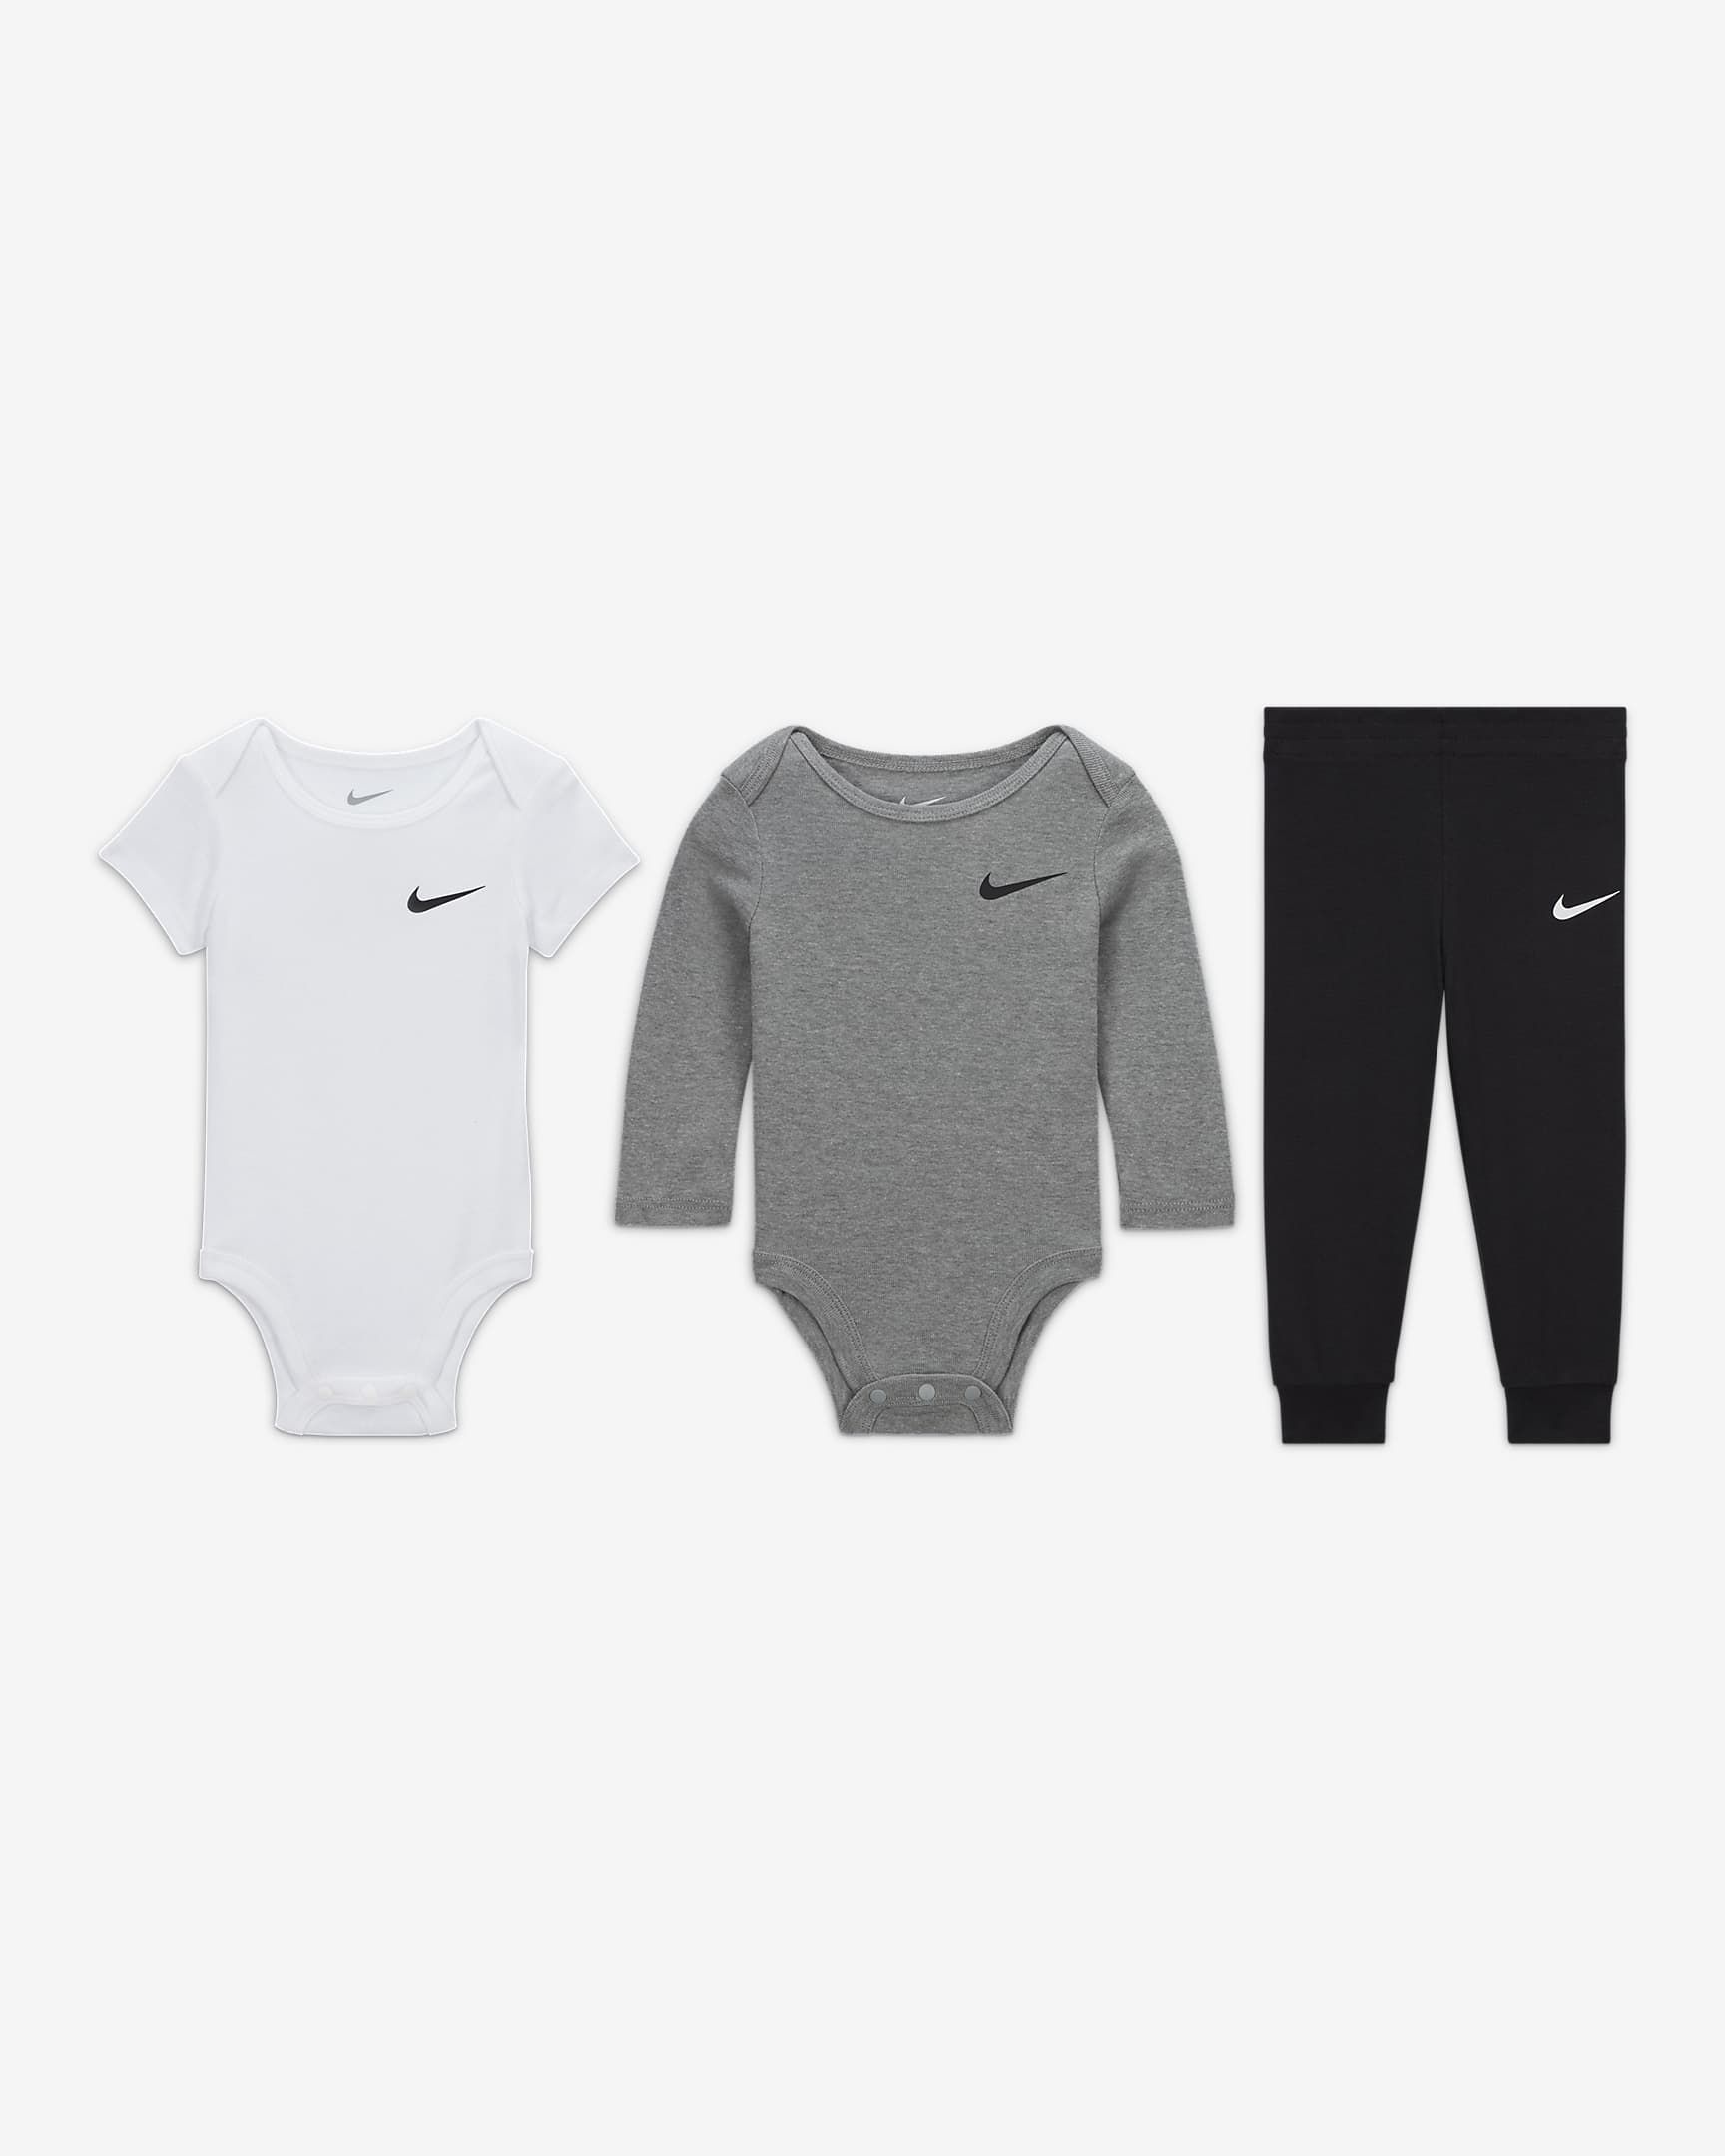 Member Exclusive: use code LETSGO for an extra 25% off select styles. Log in or sign up for free ... | Nike (US)